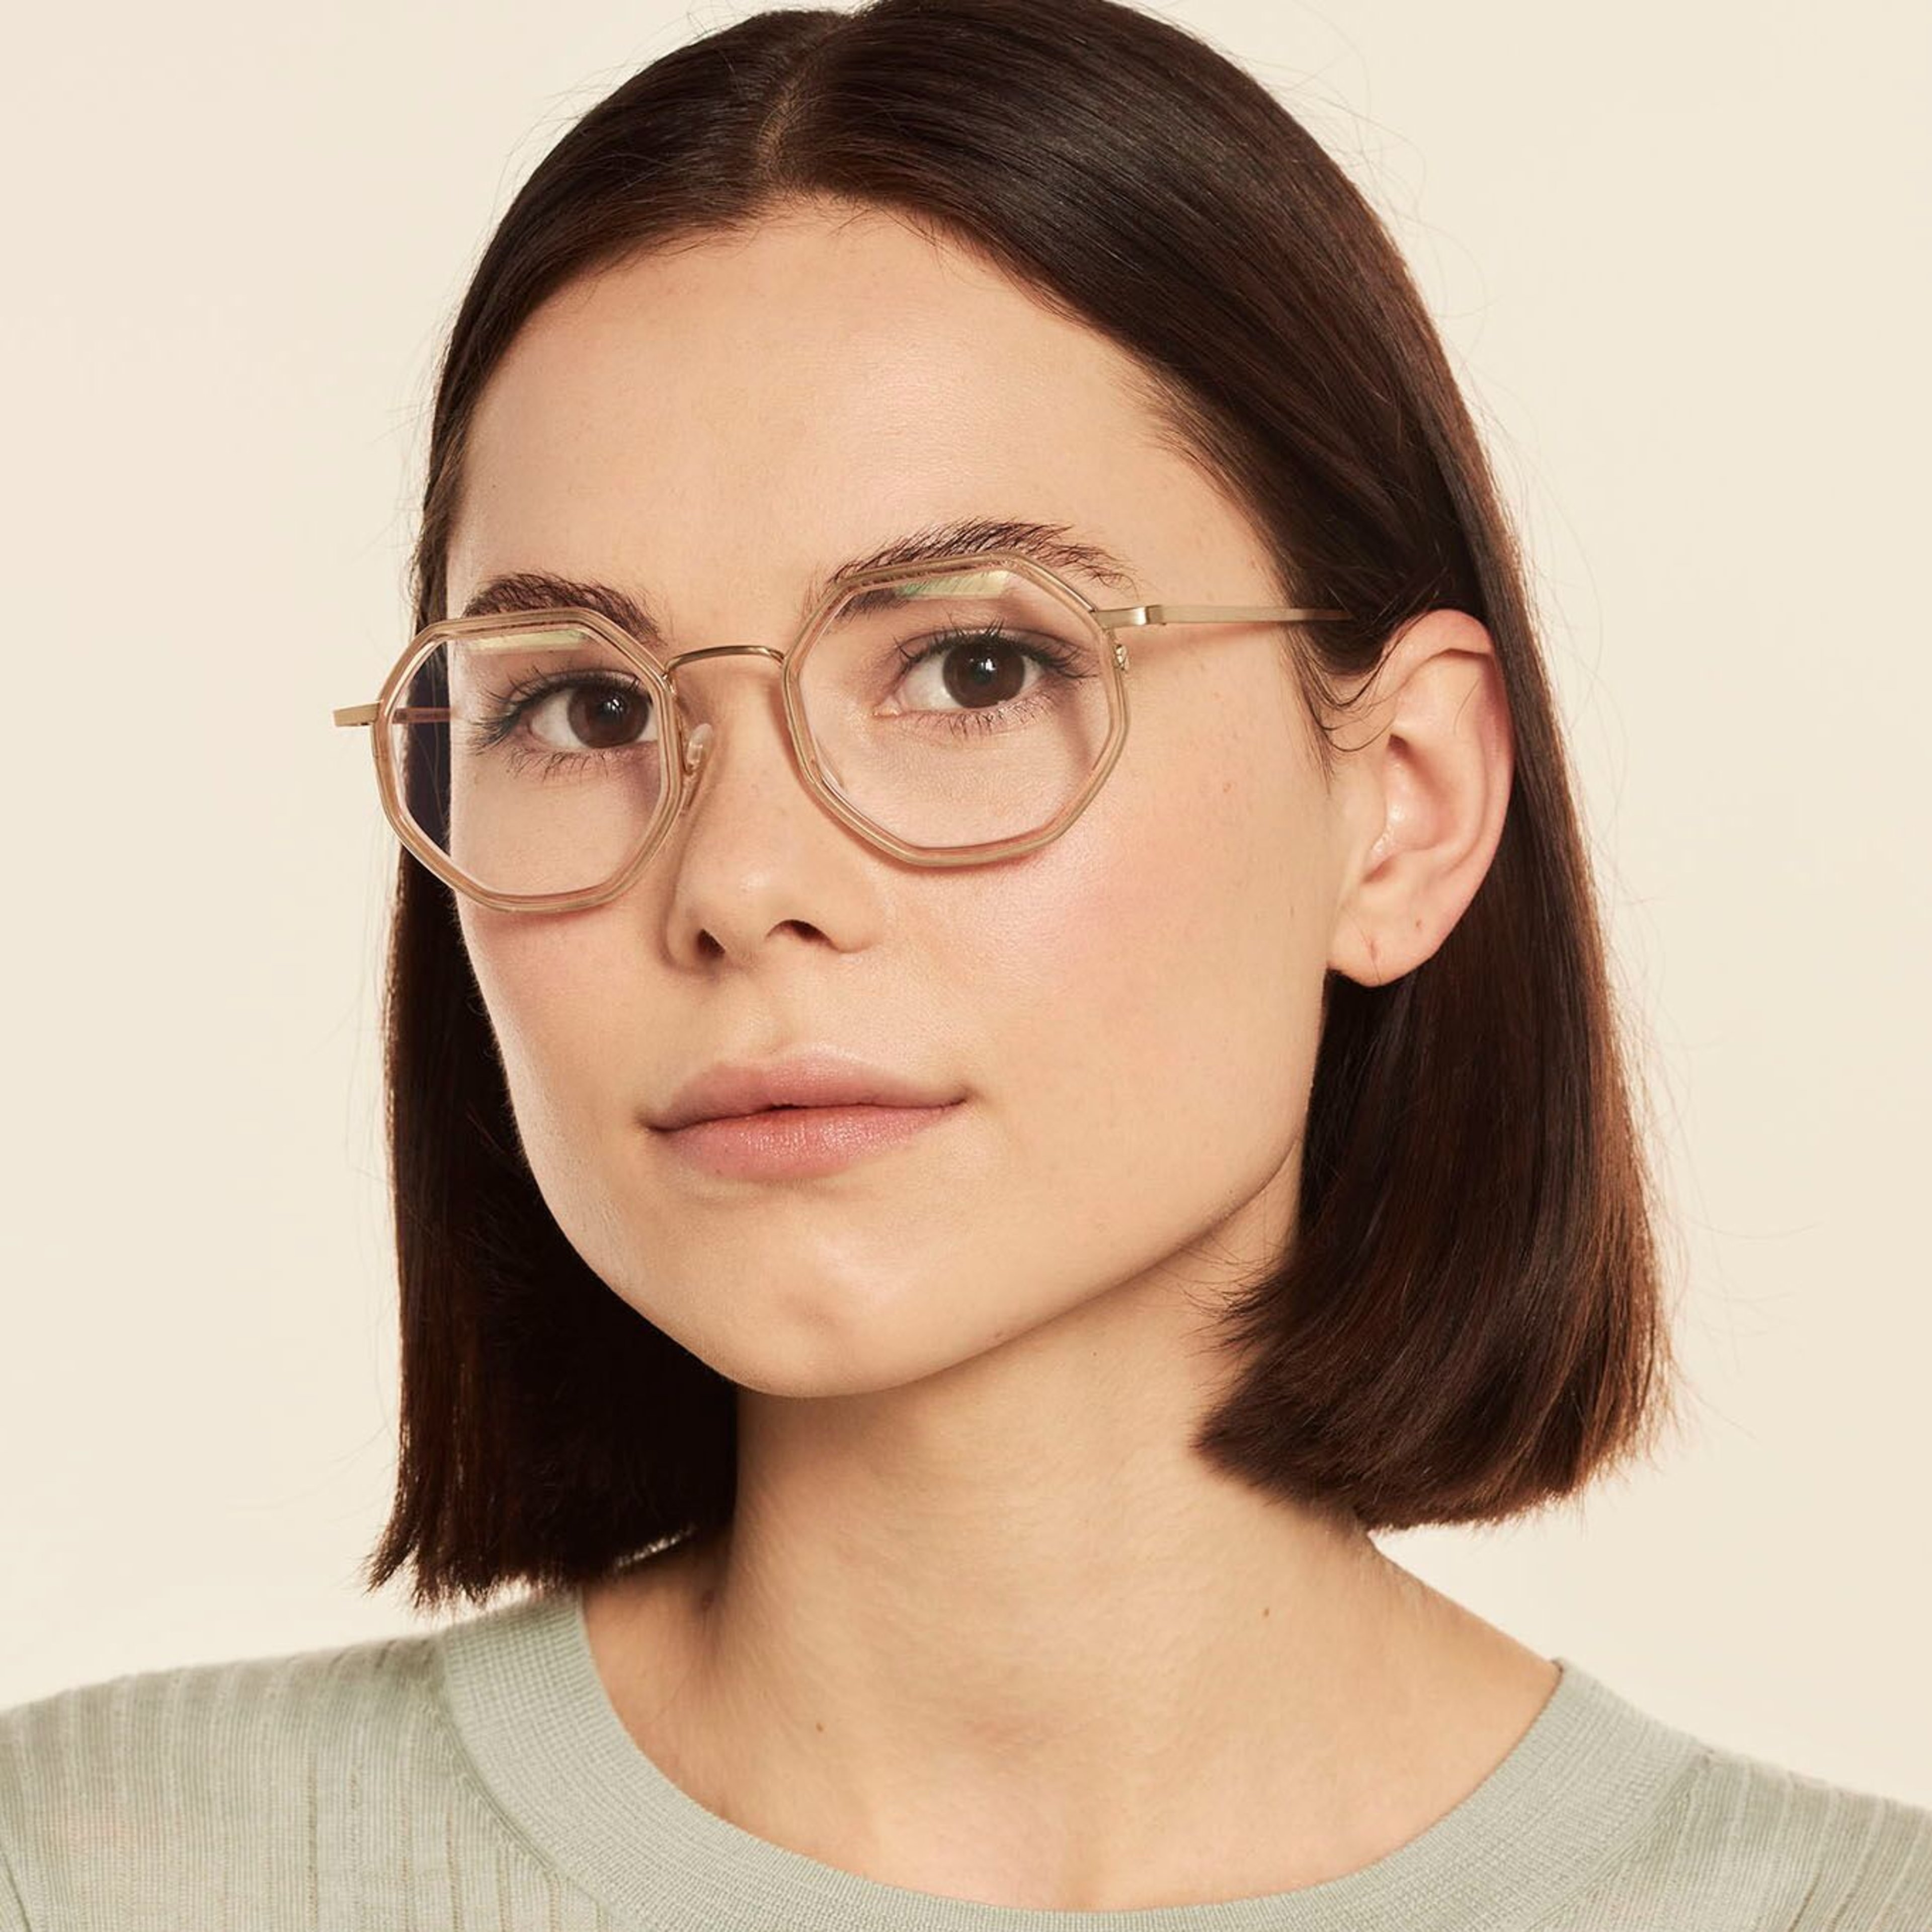 Ace & Tate Glasses | hexagonal Acetate in Clear, Gold